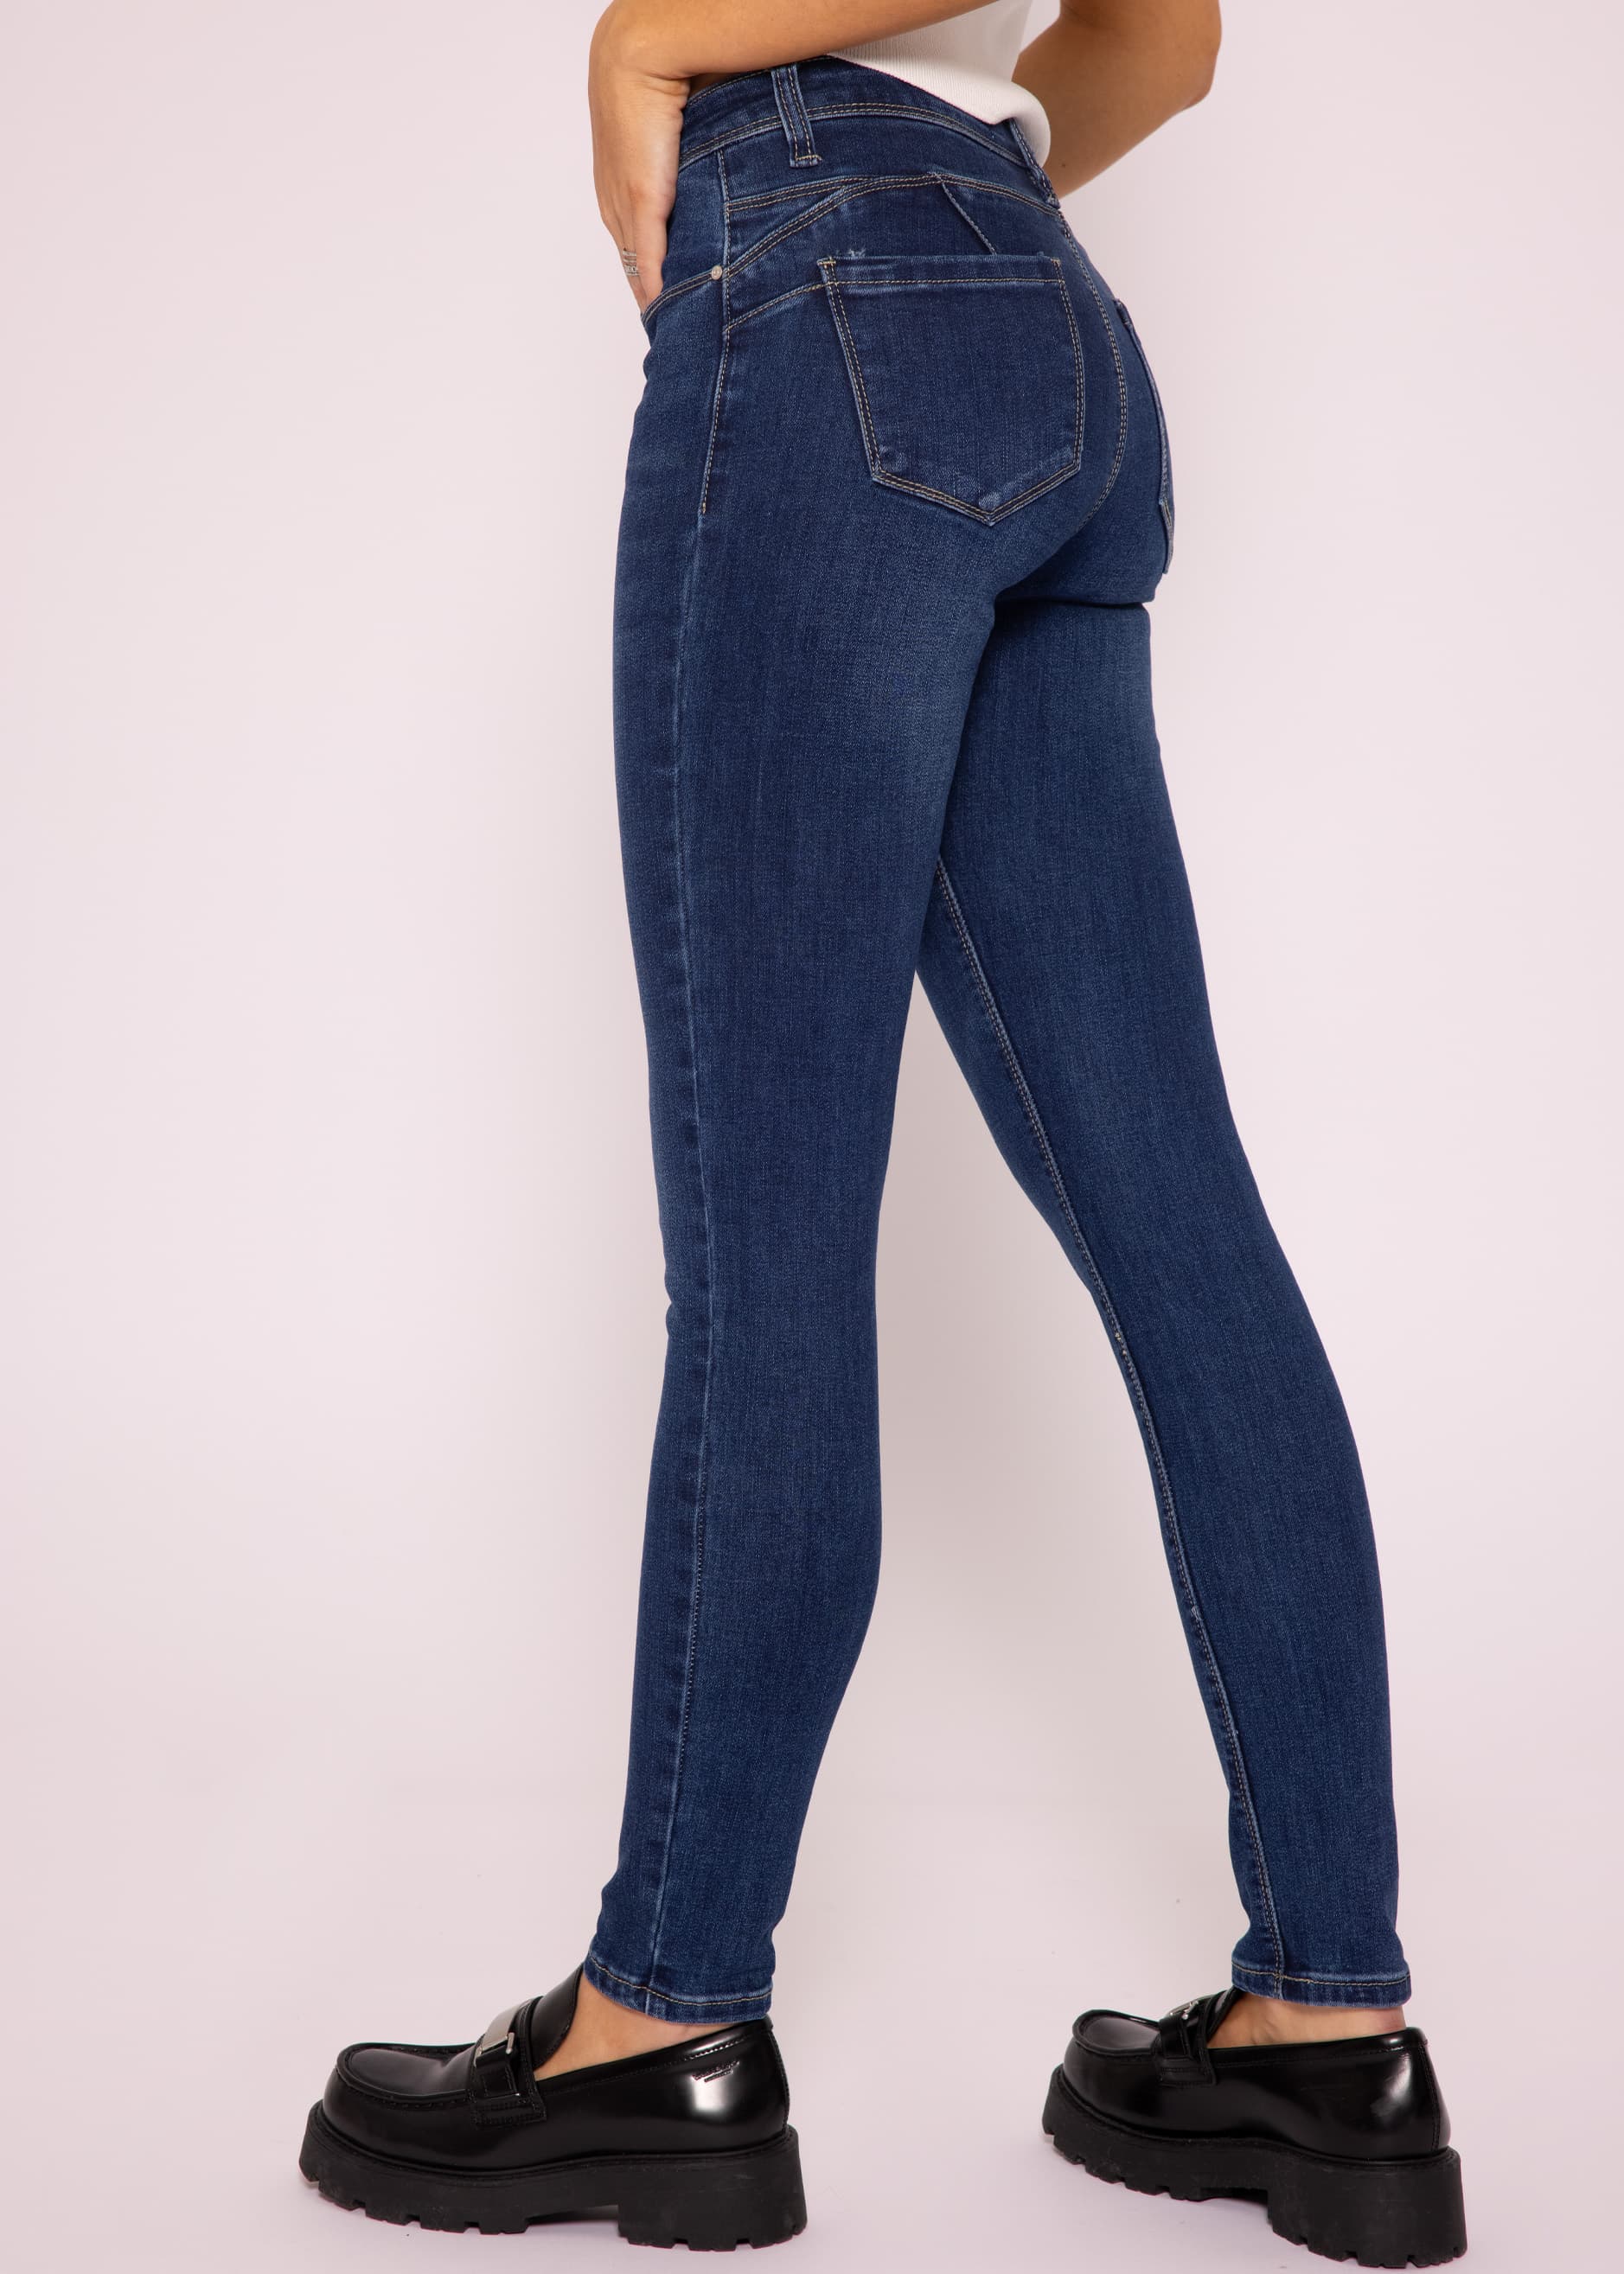 Stretchy Highwaist Push Up Jeans, blue | New Clothing | New